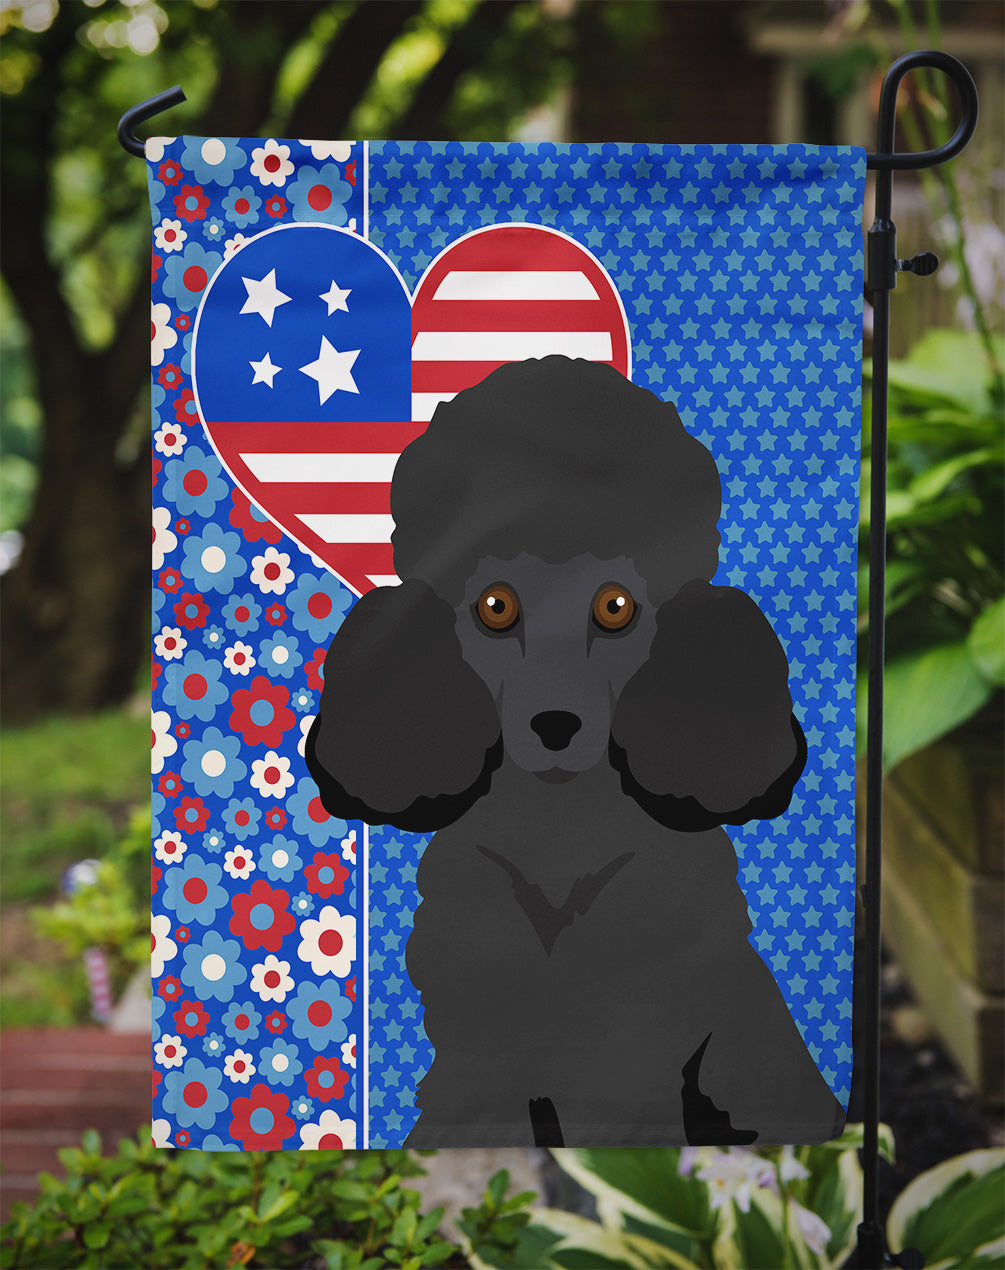 Toy Black Poodle USA American Flag Garden Size  the-store.com.